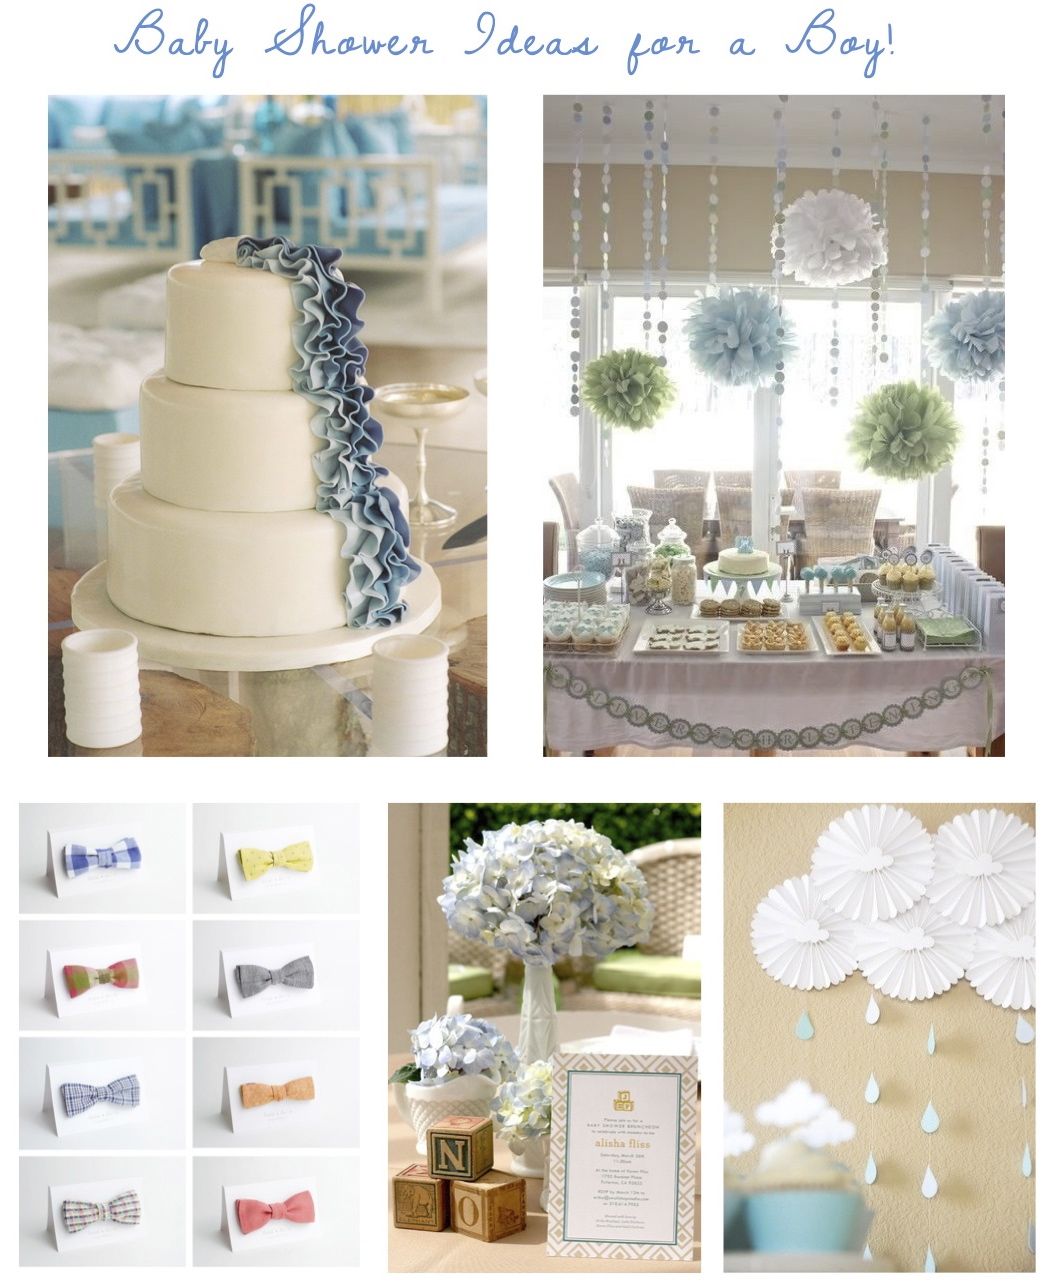 festive finds by Event Finds: Baby Shower Ideas for a Boy!